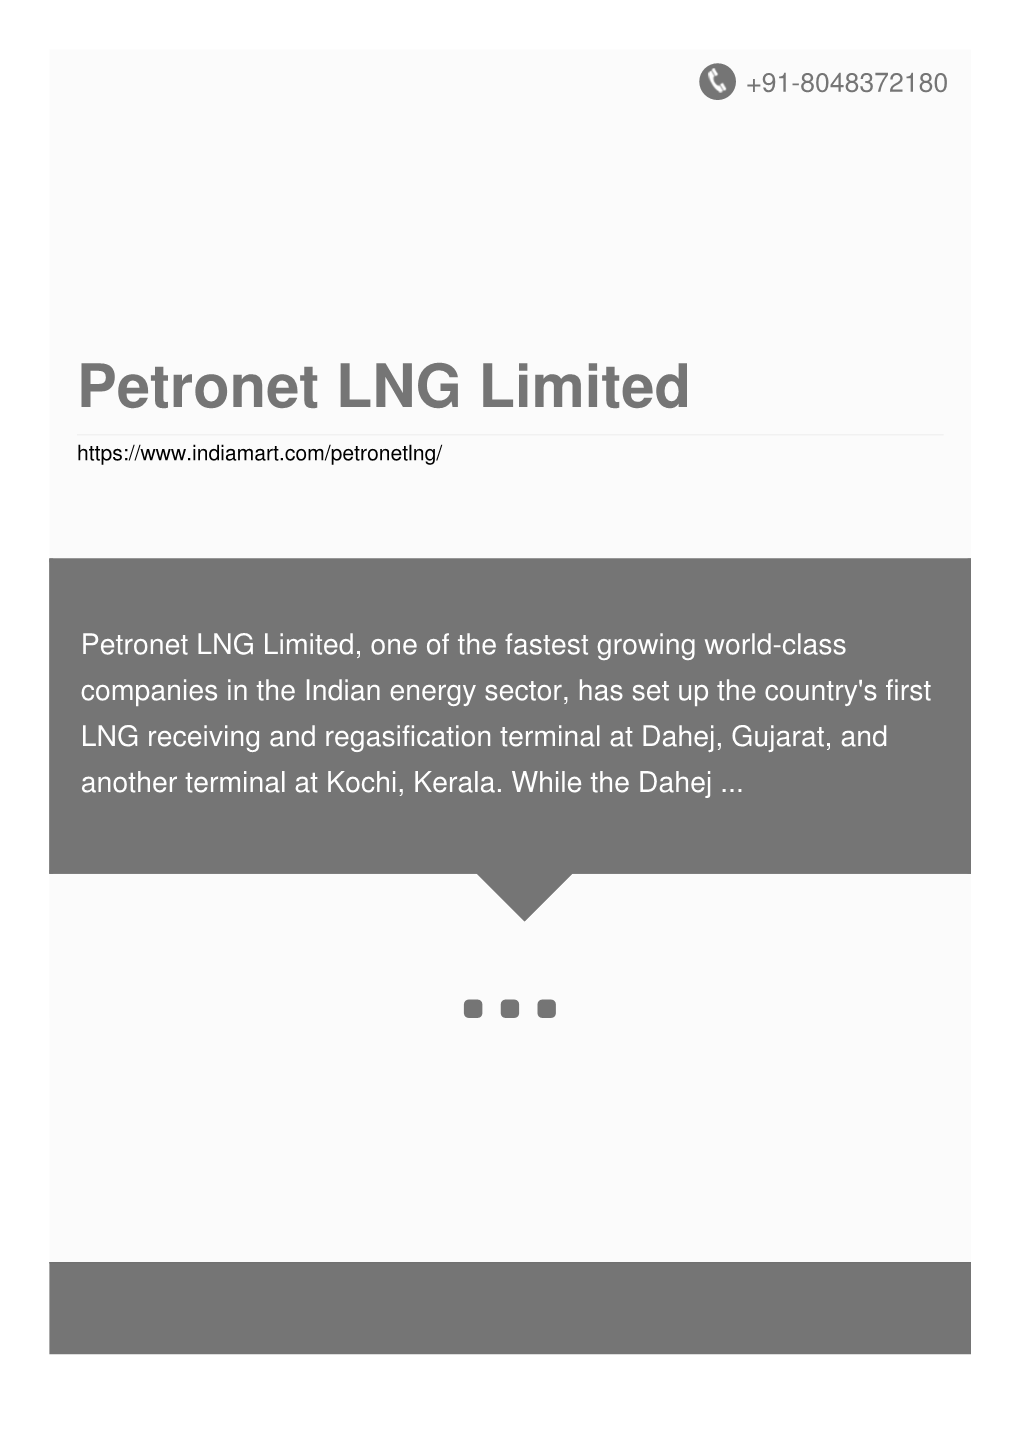 Petronet LNG Limited